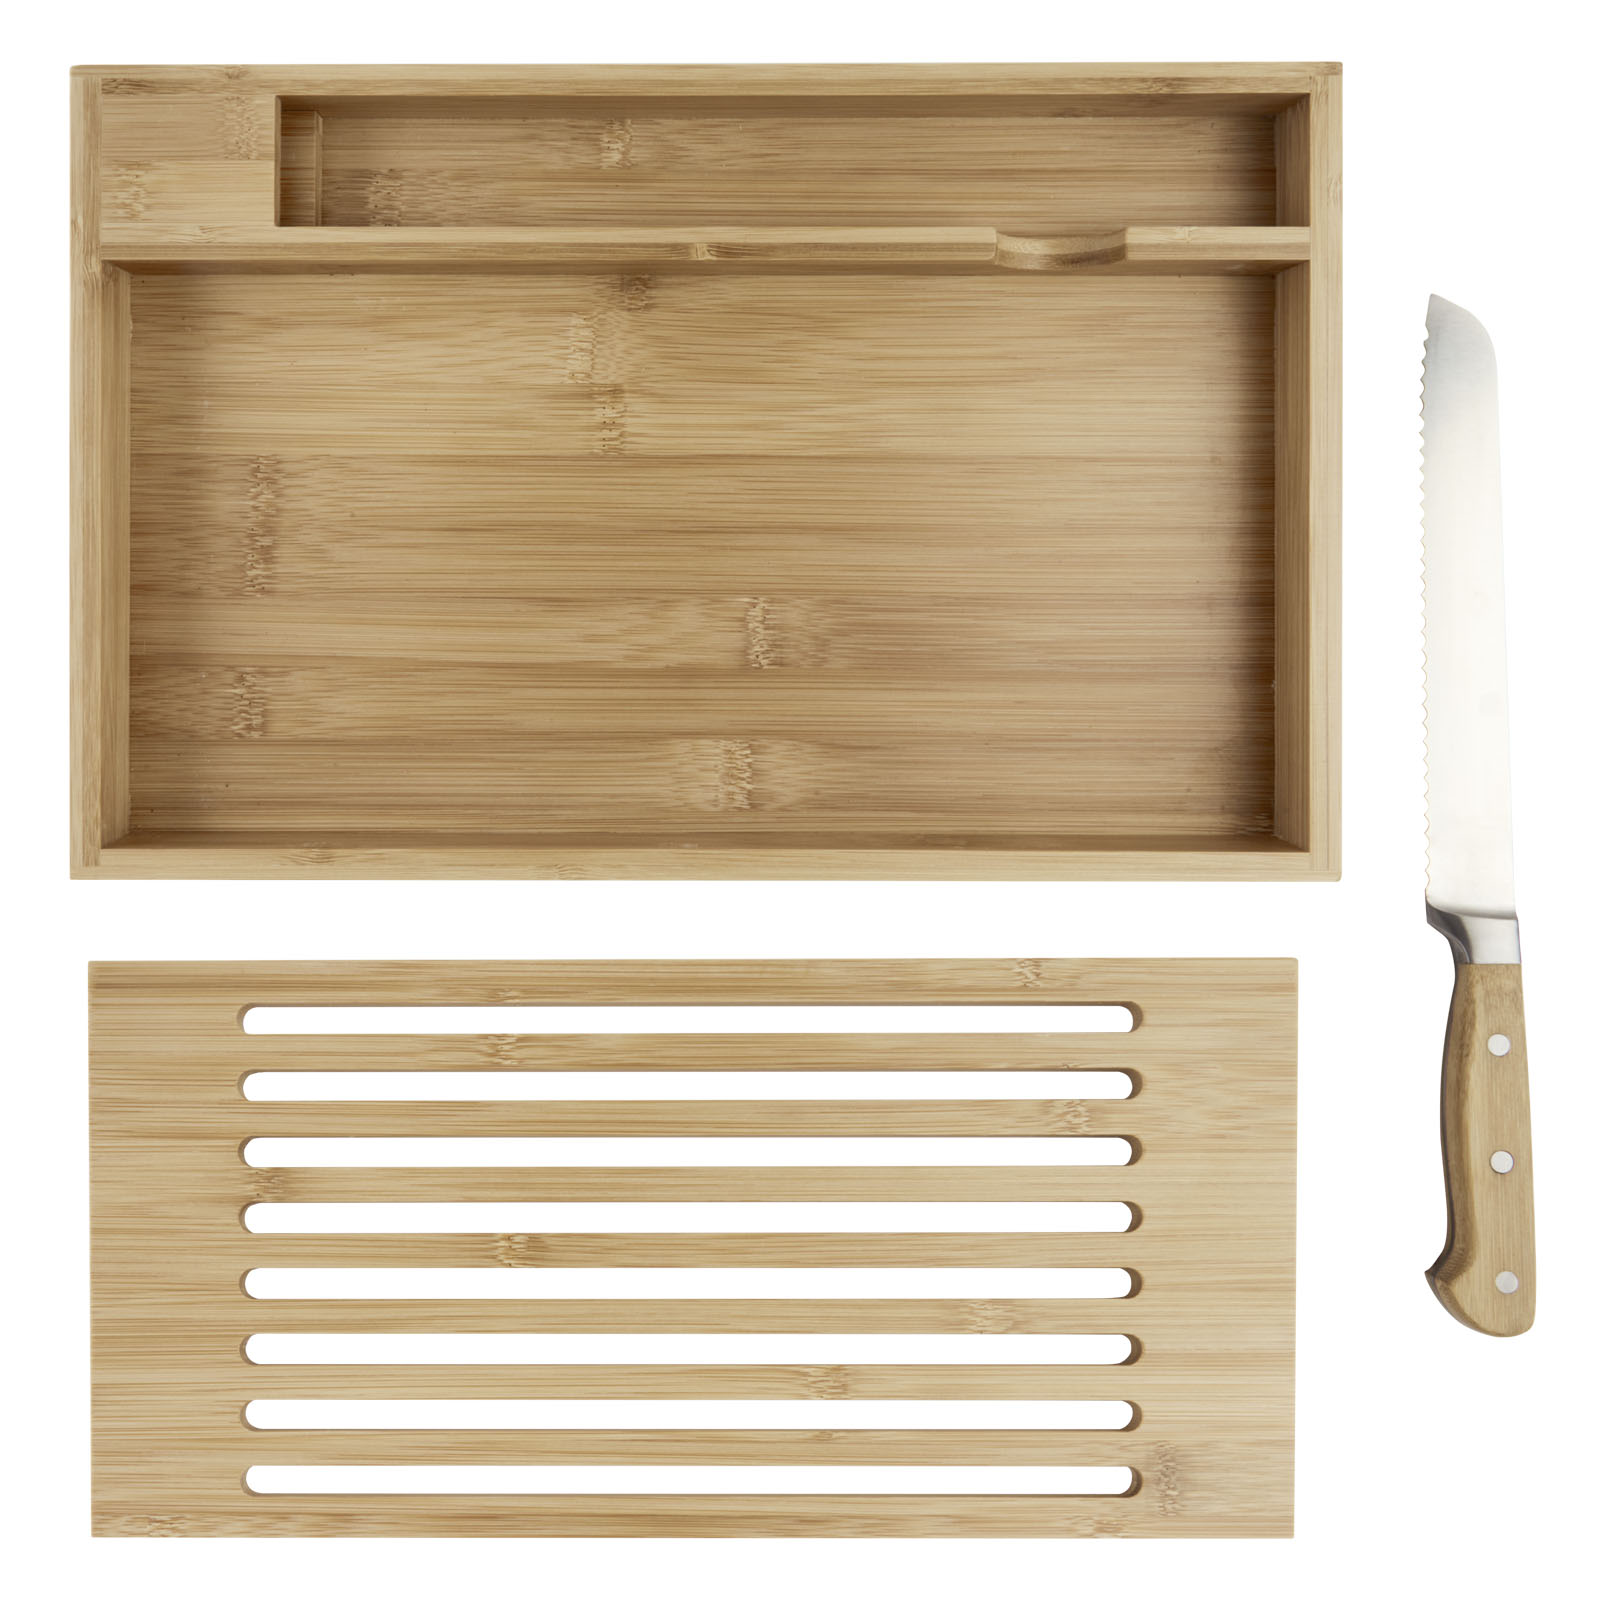 Advertising Cutting Boards - Pao bamboo cutting board with knife - 4